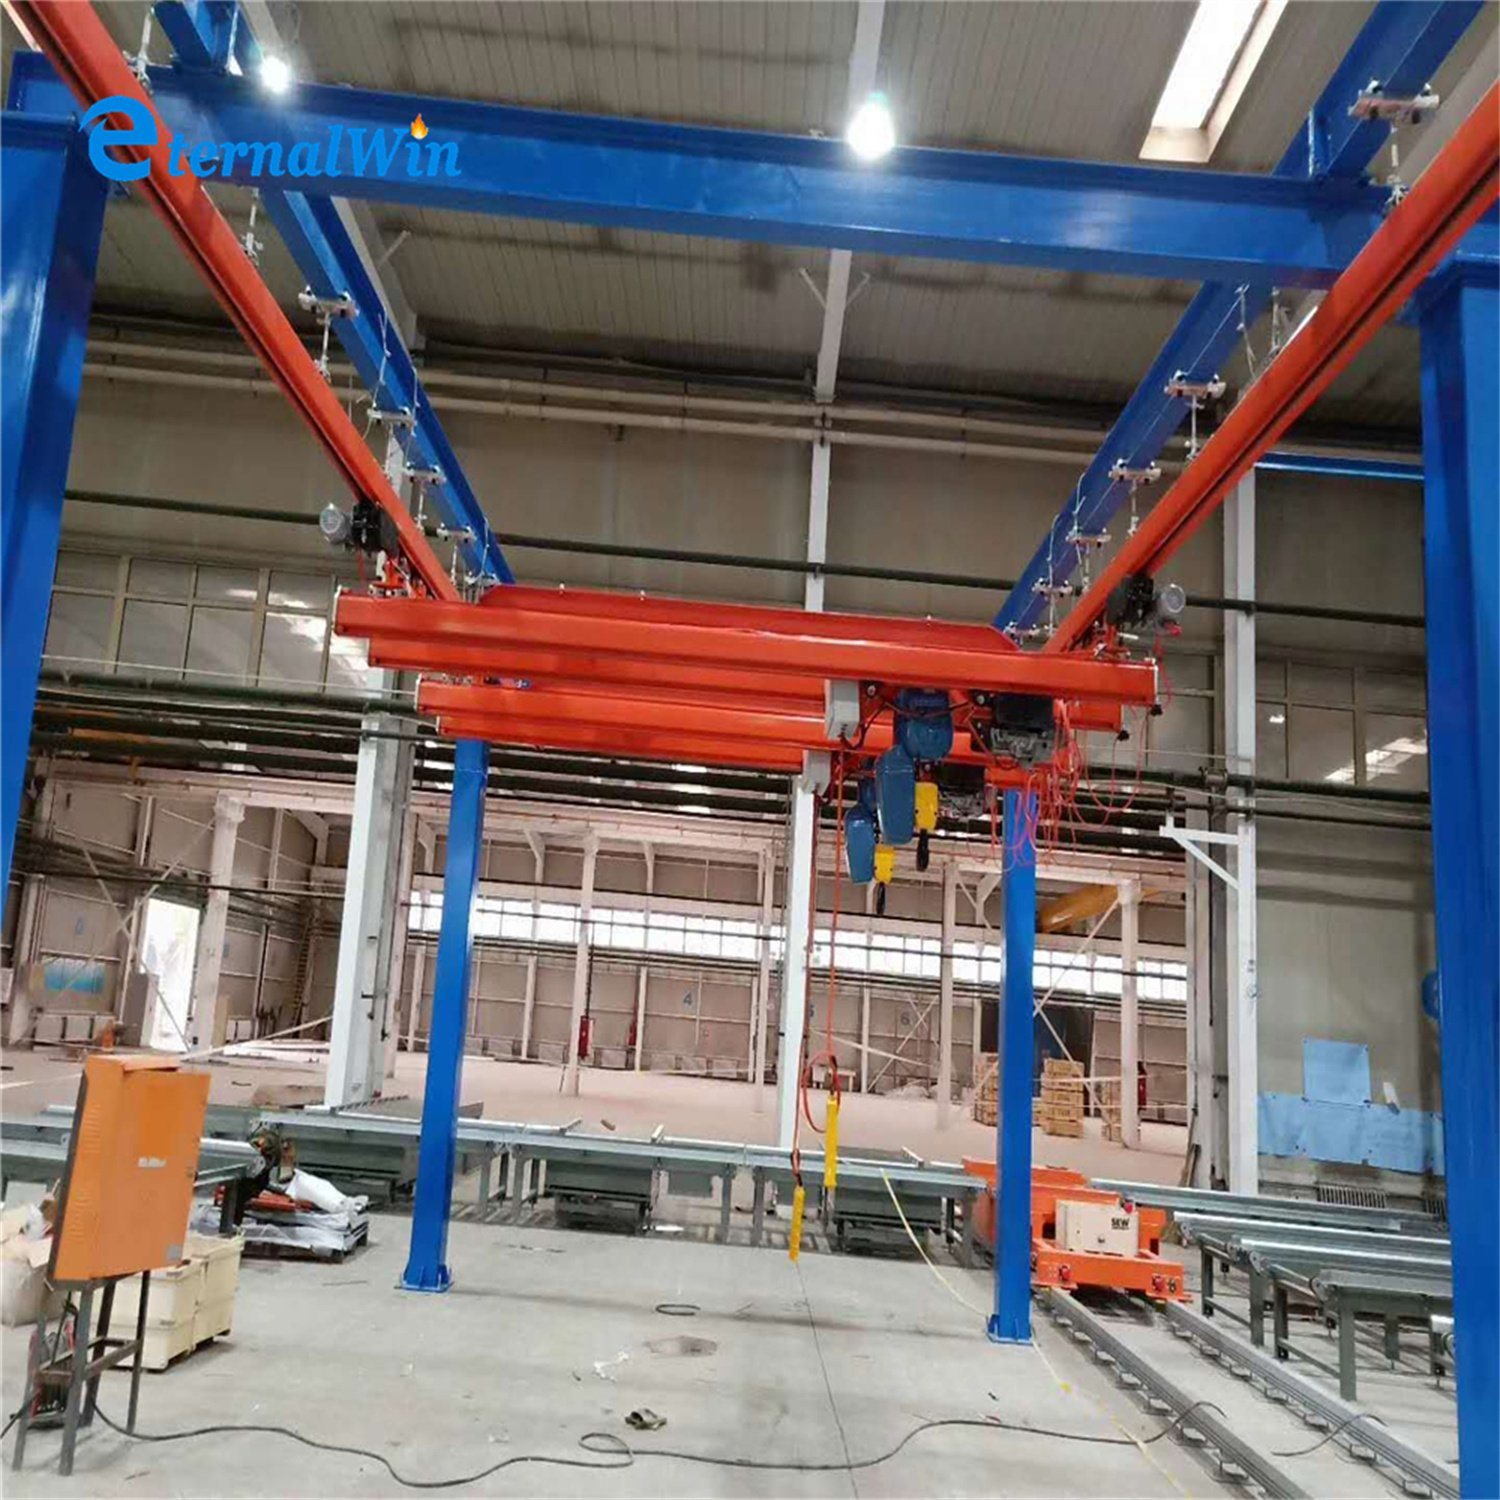 Craft Spray Paint Used Crane Hanging Rail Monorail System Eot Bridge Crane Gantry Crane System with Hanging Hoist and Steel Structure